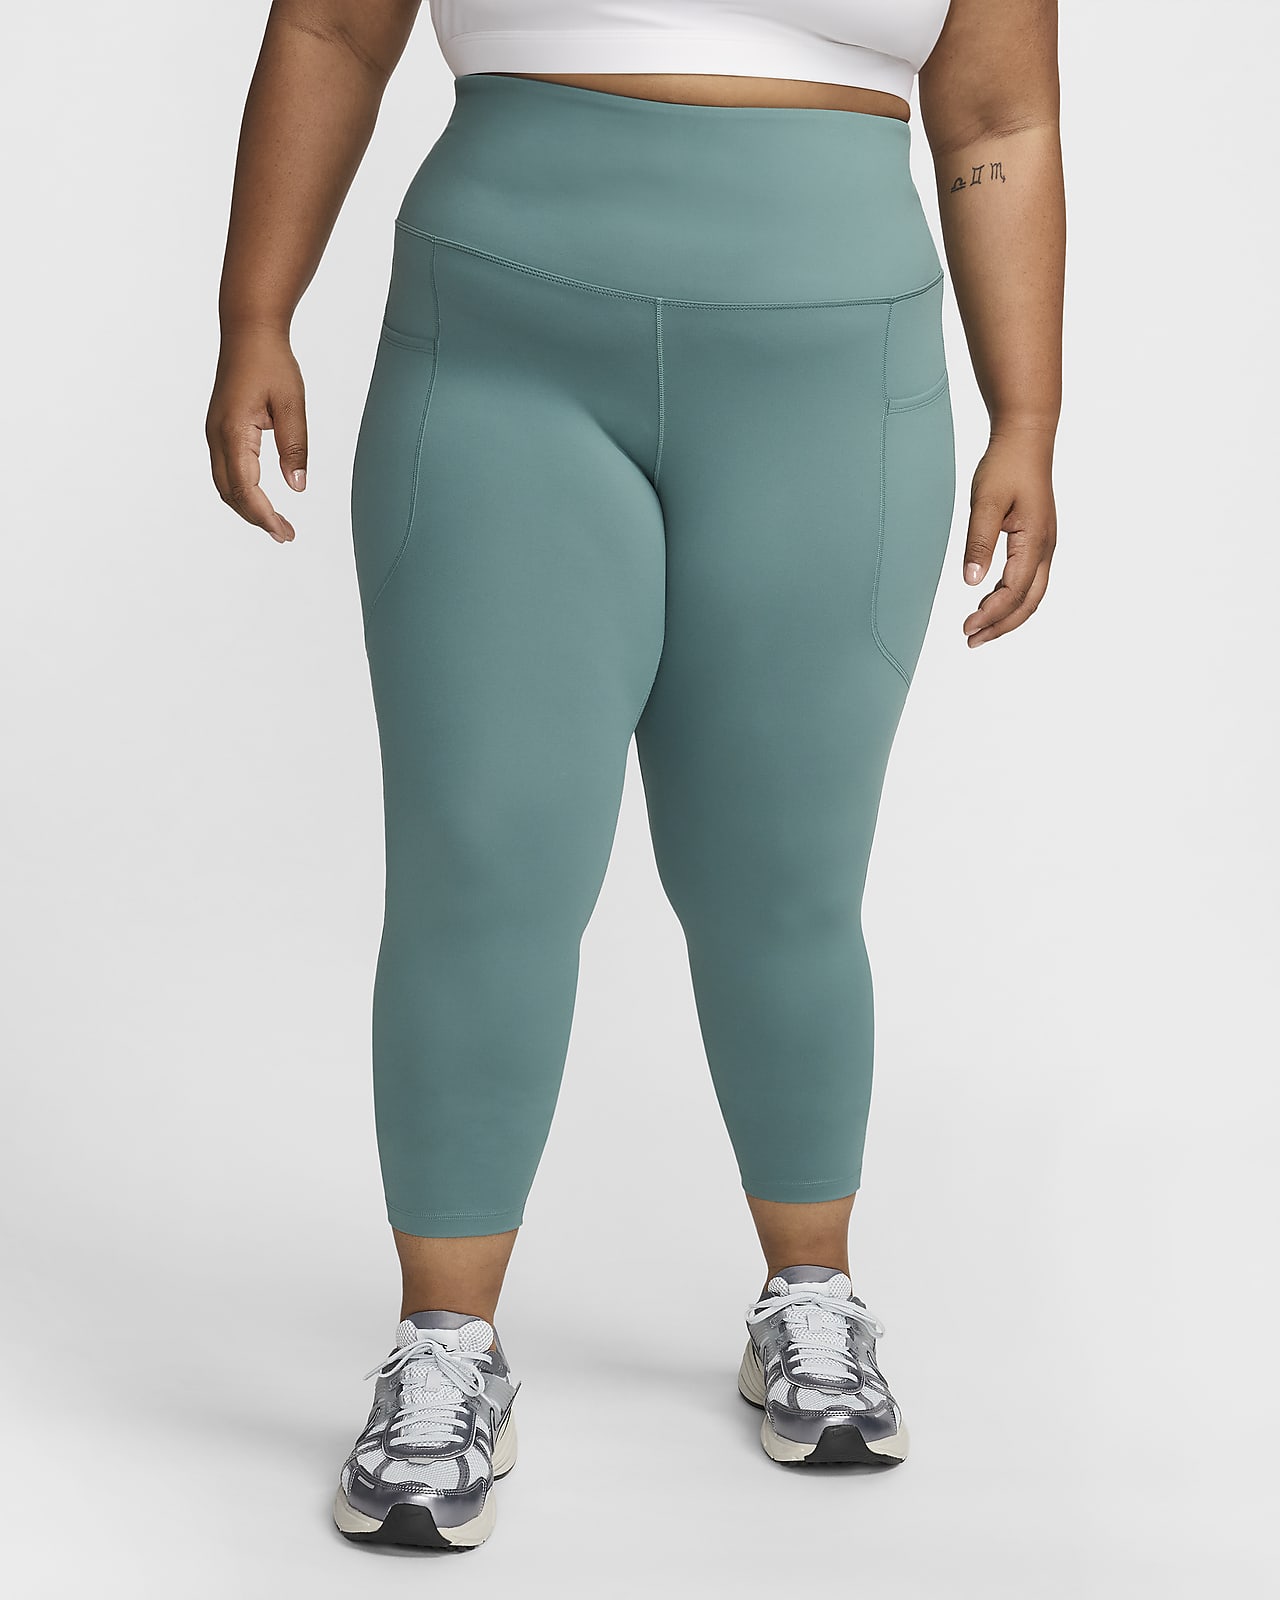 https://static.nike.com/a/images/t_PDP_1280_v1/f_auto,q_auto:eco/c7292588-89bd-4b12-b7a8-eaa95fc63313/one-womens-high-waisted-7-8-leggings-with-pockets-plus-size-1Nf5Vm.png